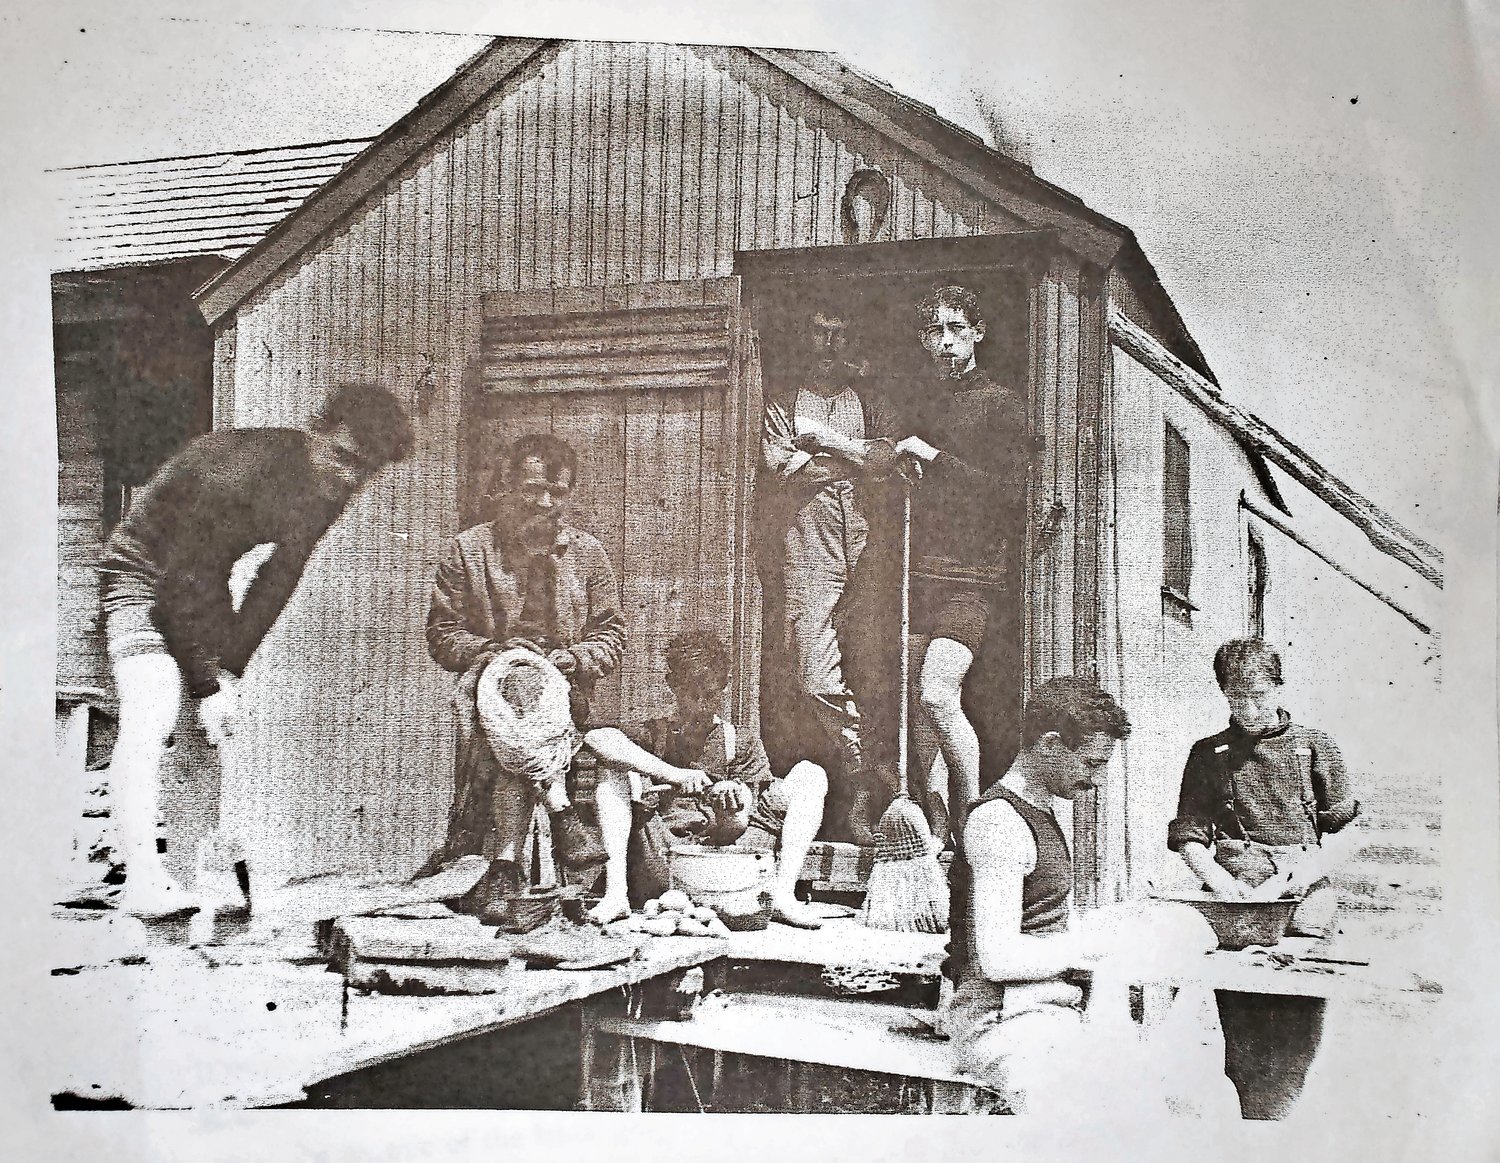 During the years of Prohibition, baymen retrieved alcohol from Canadian cargo ships and stashed them in “bay house” hideaways located on islands in the Great South Bay.